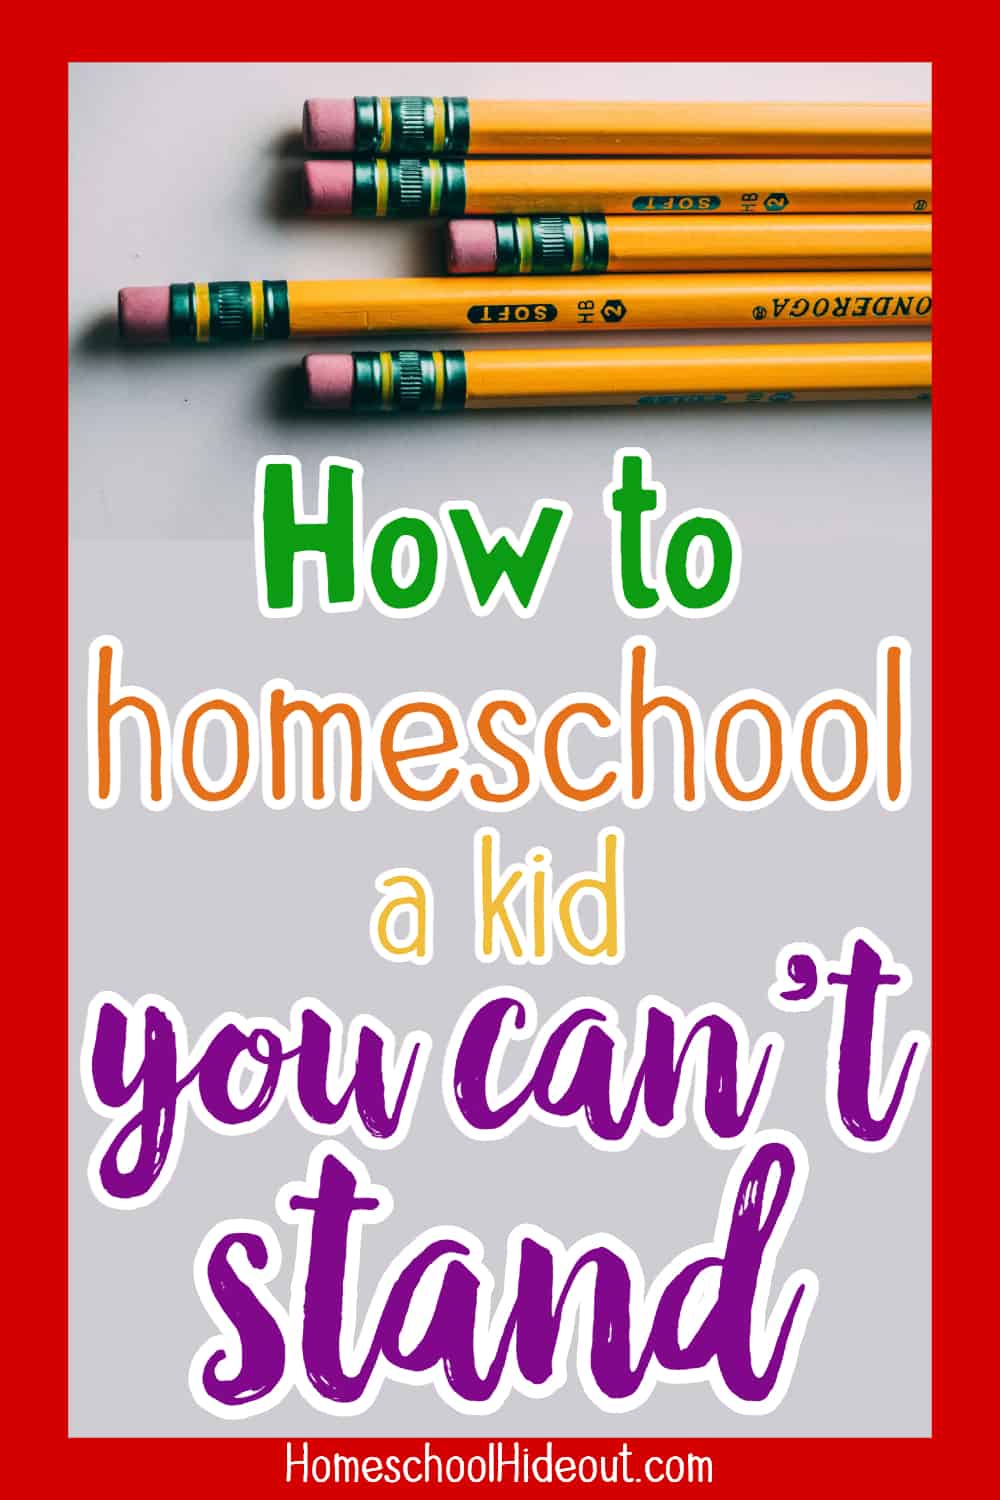 Sometimes you have to homeschool a kid you can't stand and it's not that easy! These tips are so helpful and just what I needed.